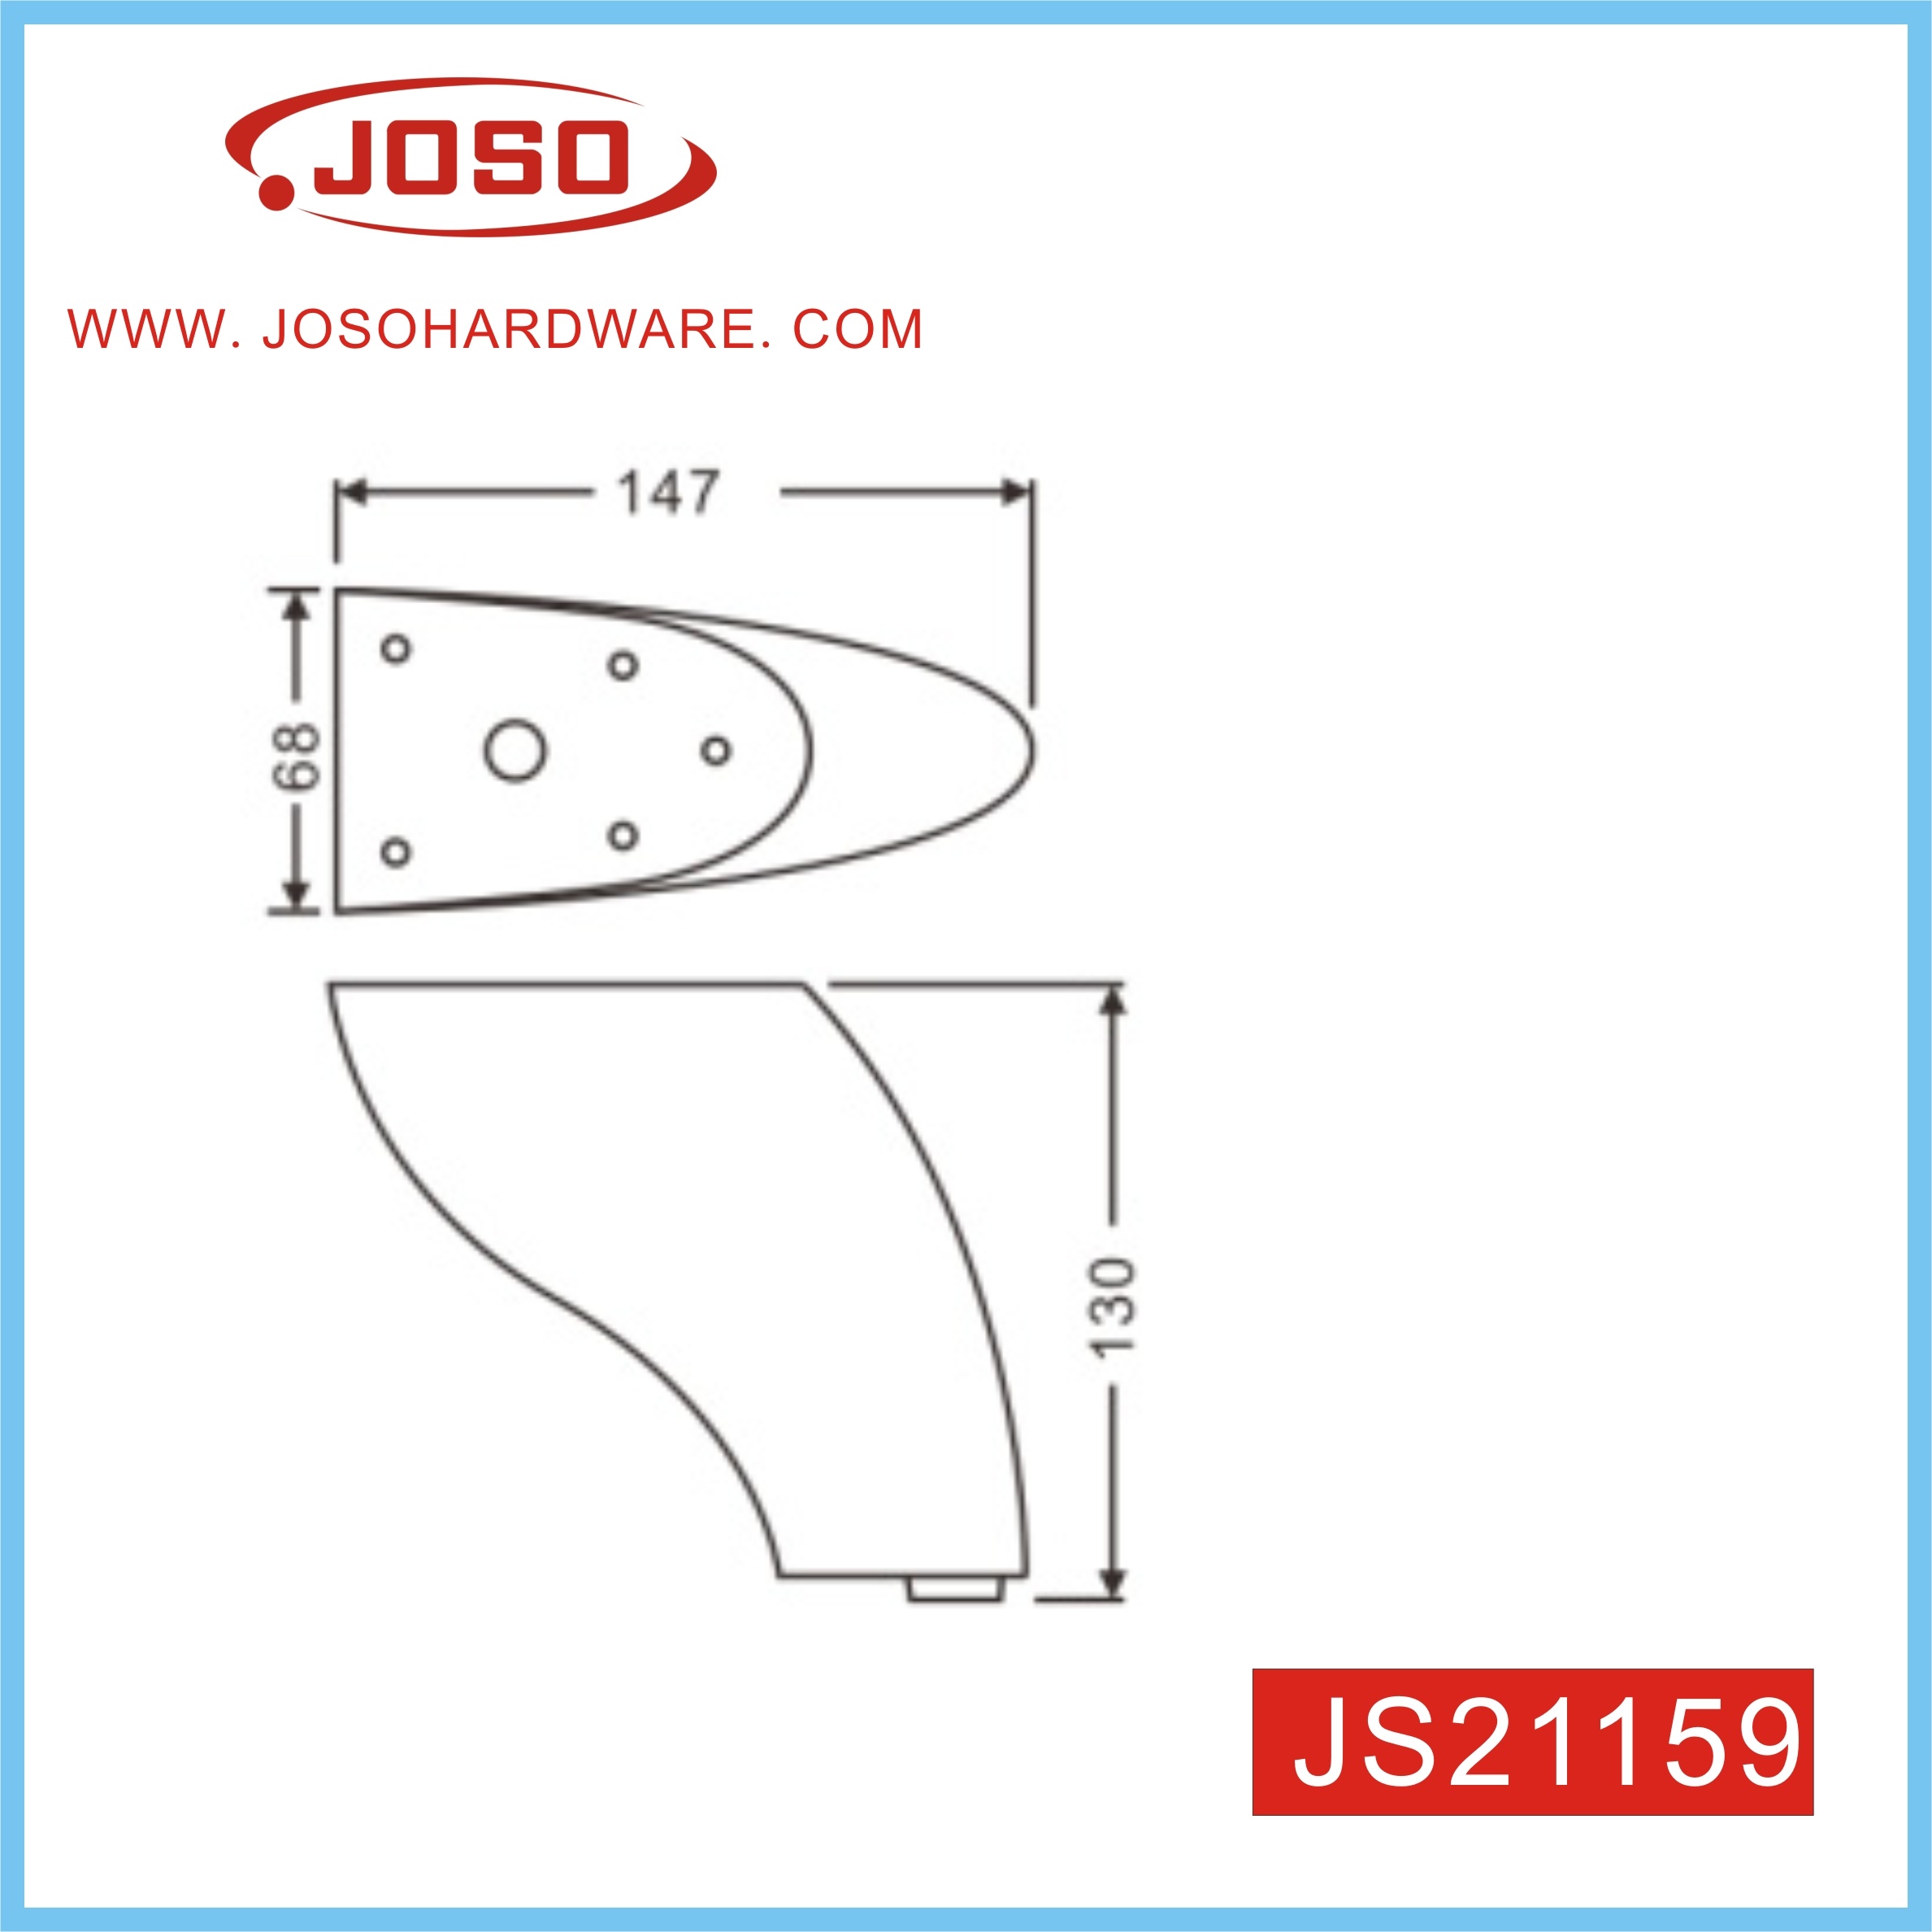 Whole Sale Furniture Parts Quality Plated Leg for Sofa